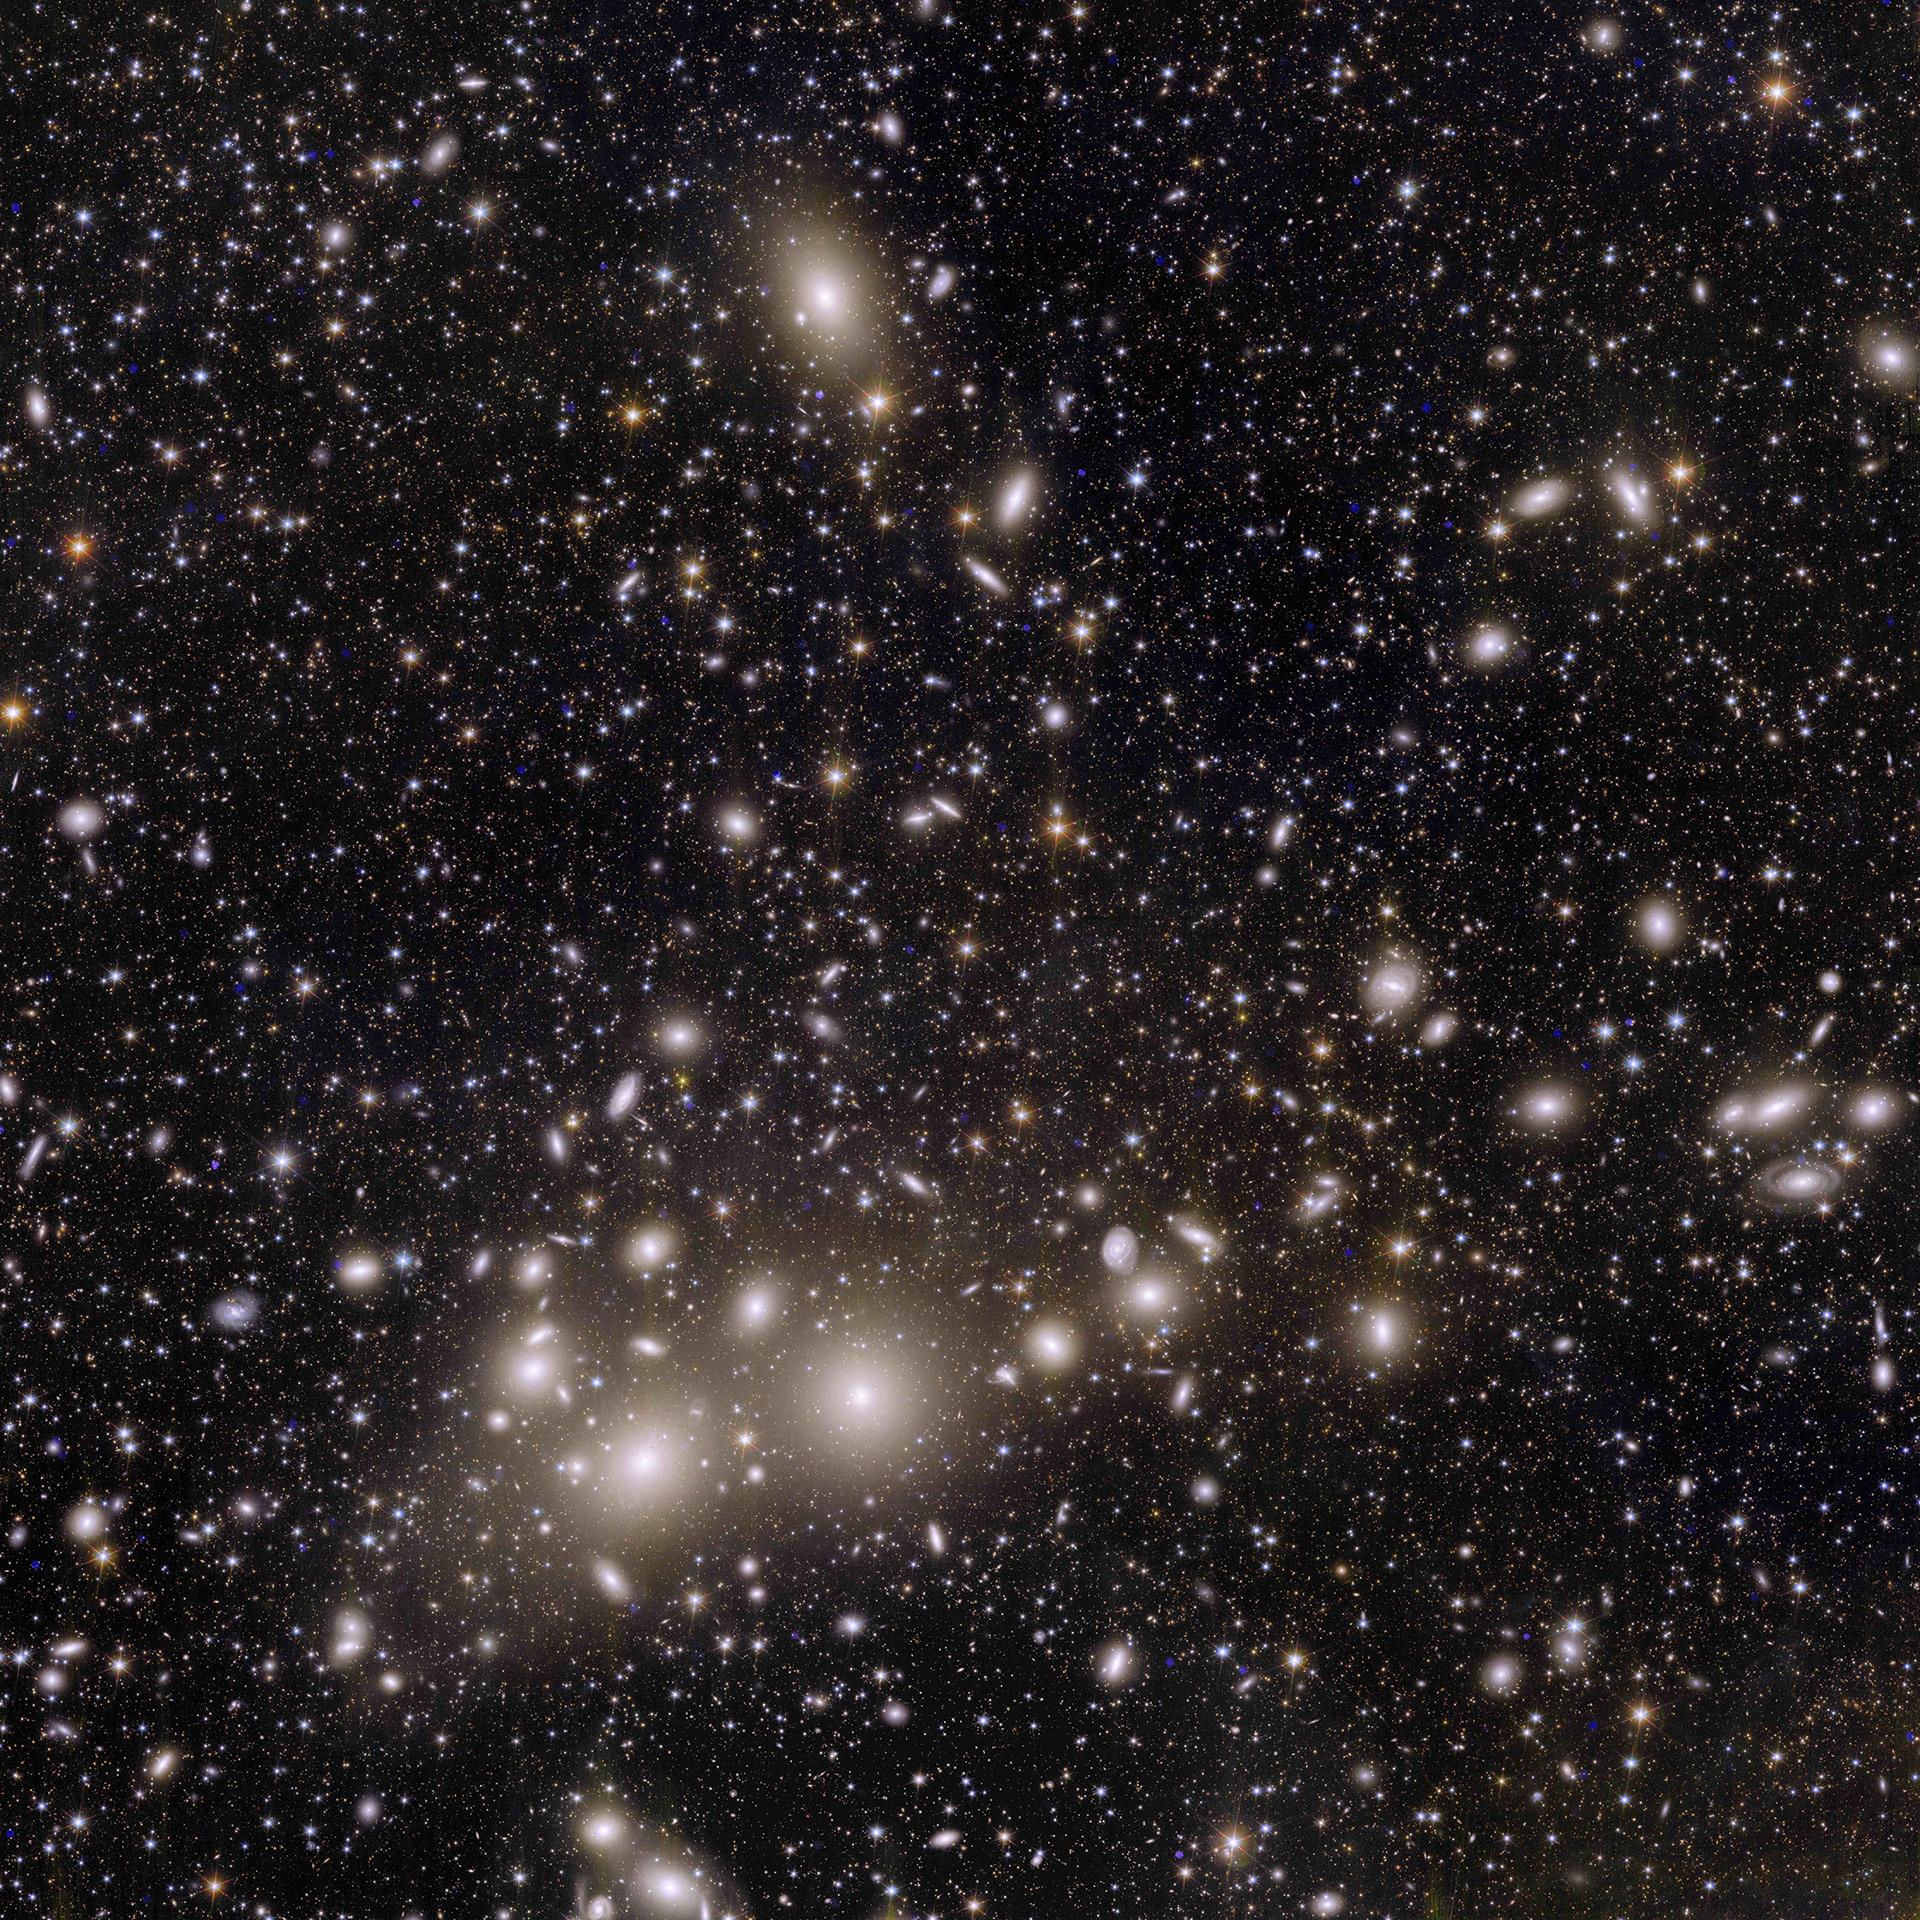 Euclid_s_view_of_the_Perseus_cluster_of_galaxies.jpg